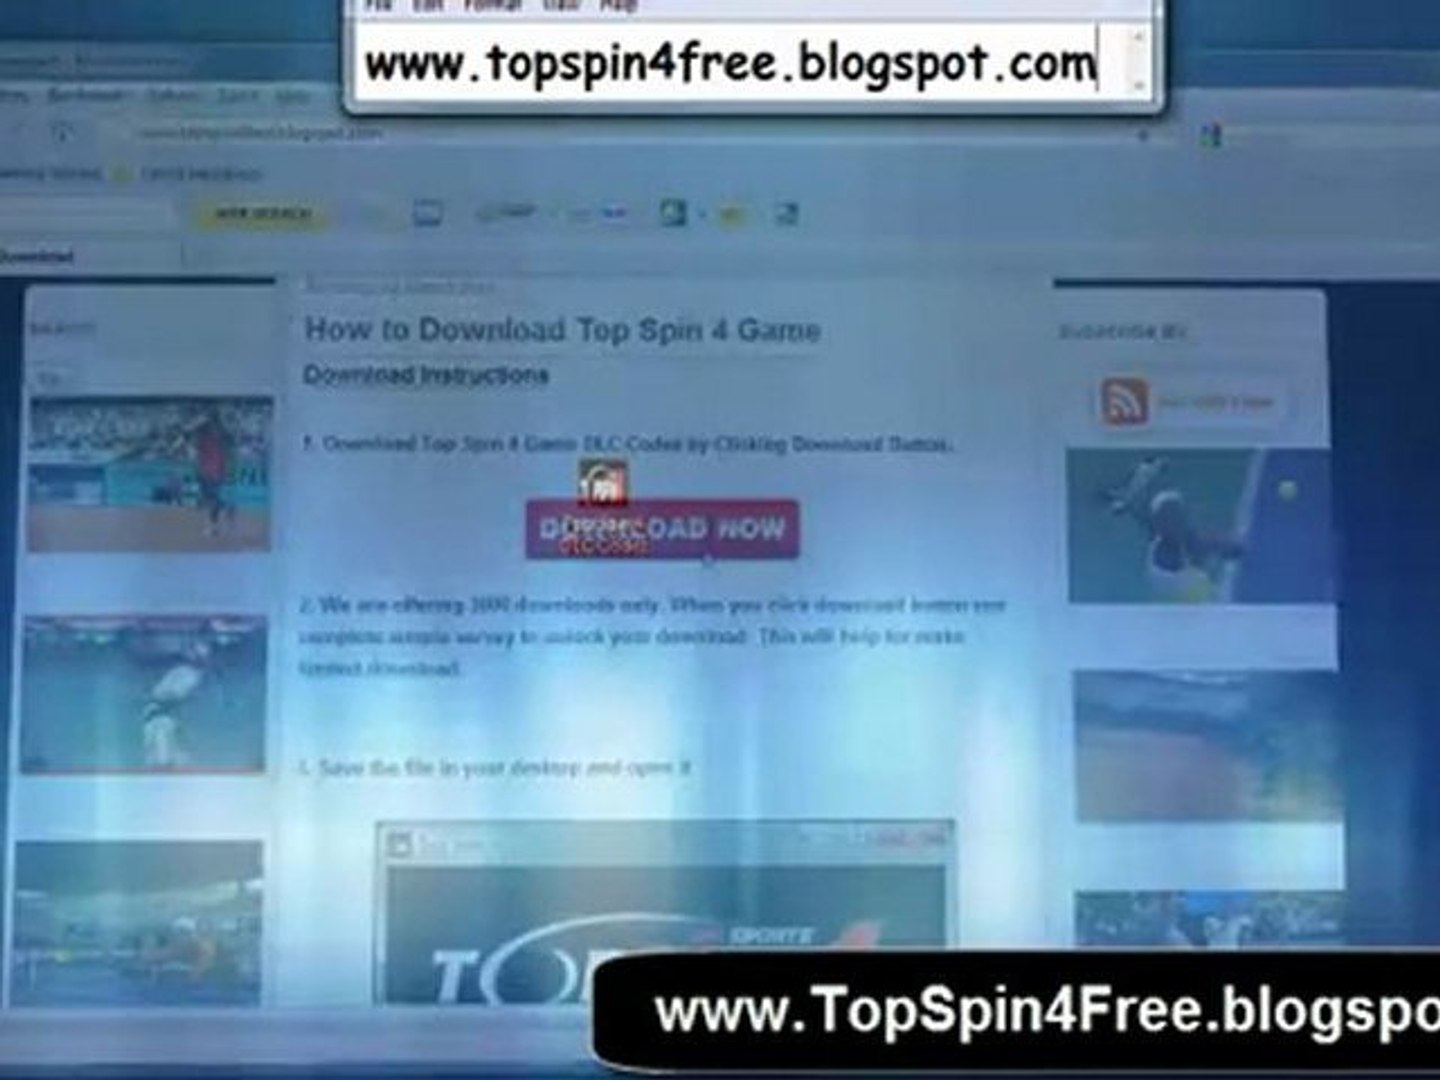 How to Get freeTop Spin 4 Keygen for Xbox 360 and PS3 - video Dailymotion